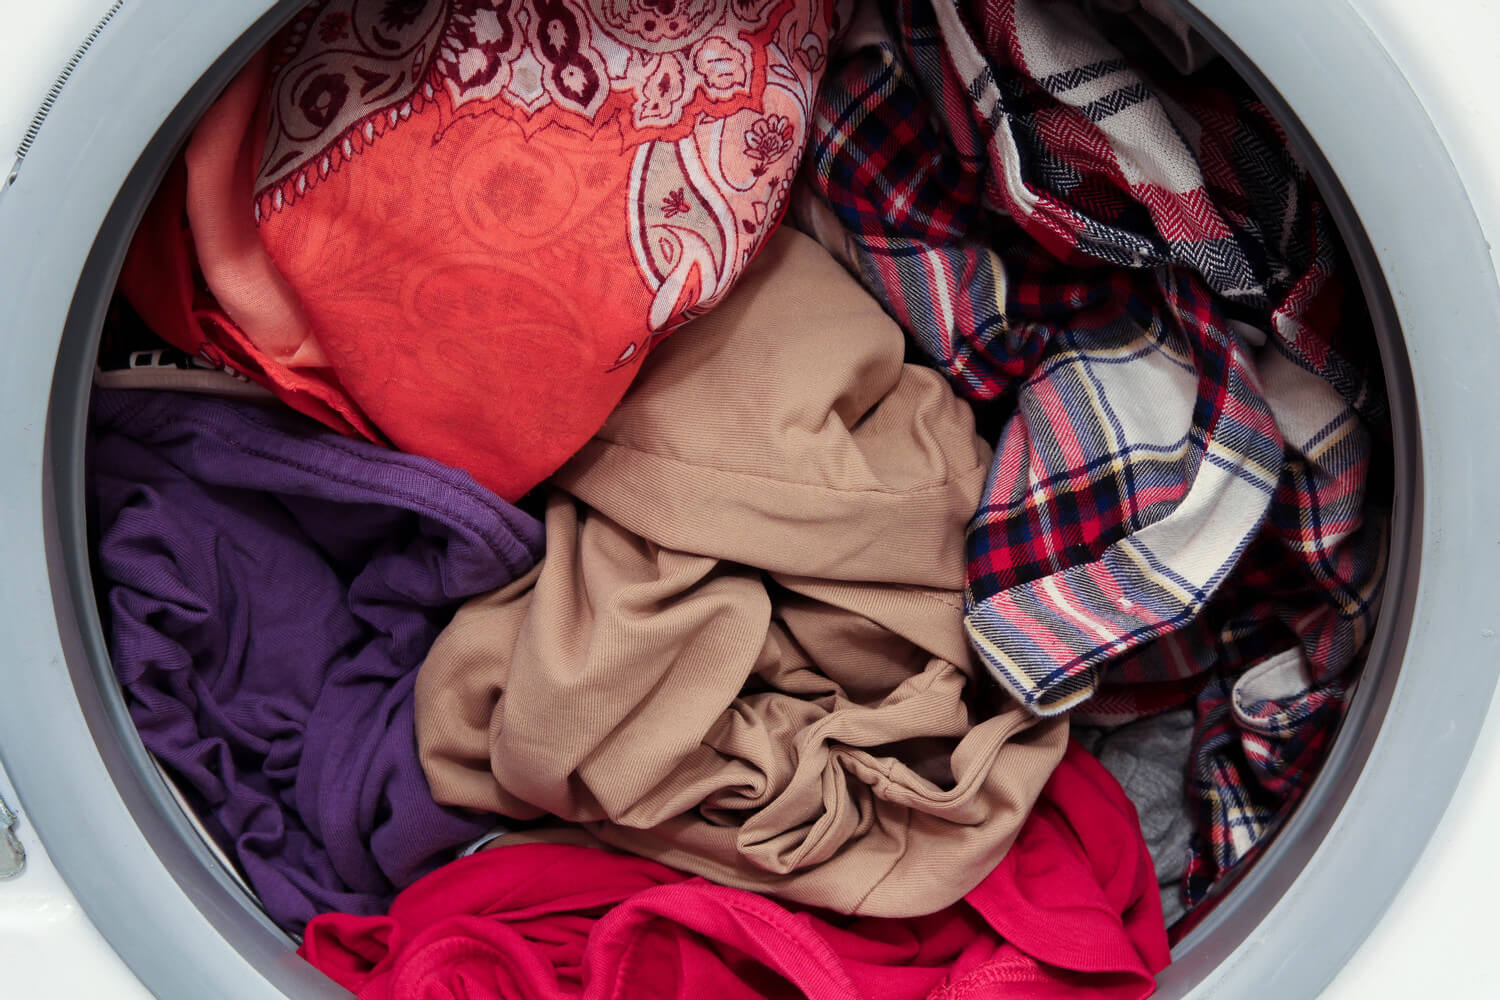 Avoid overloading your washing machine with clothes